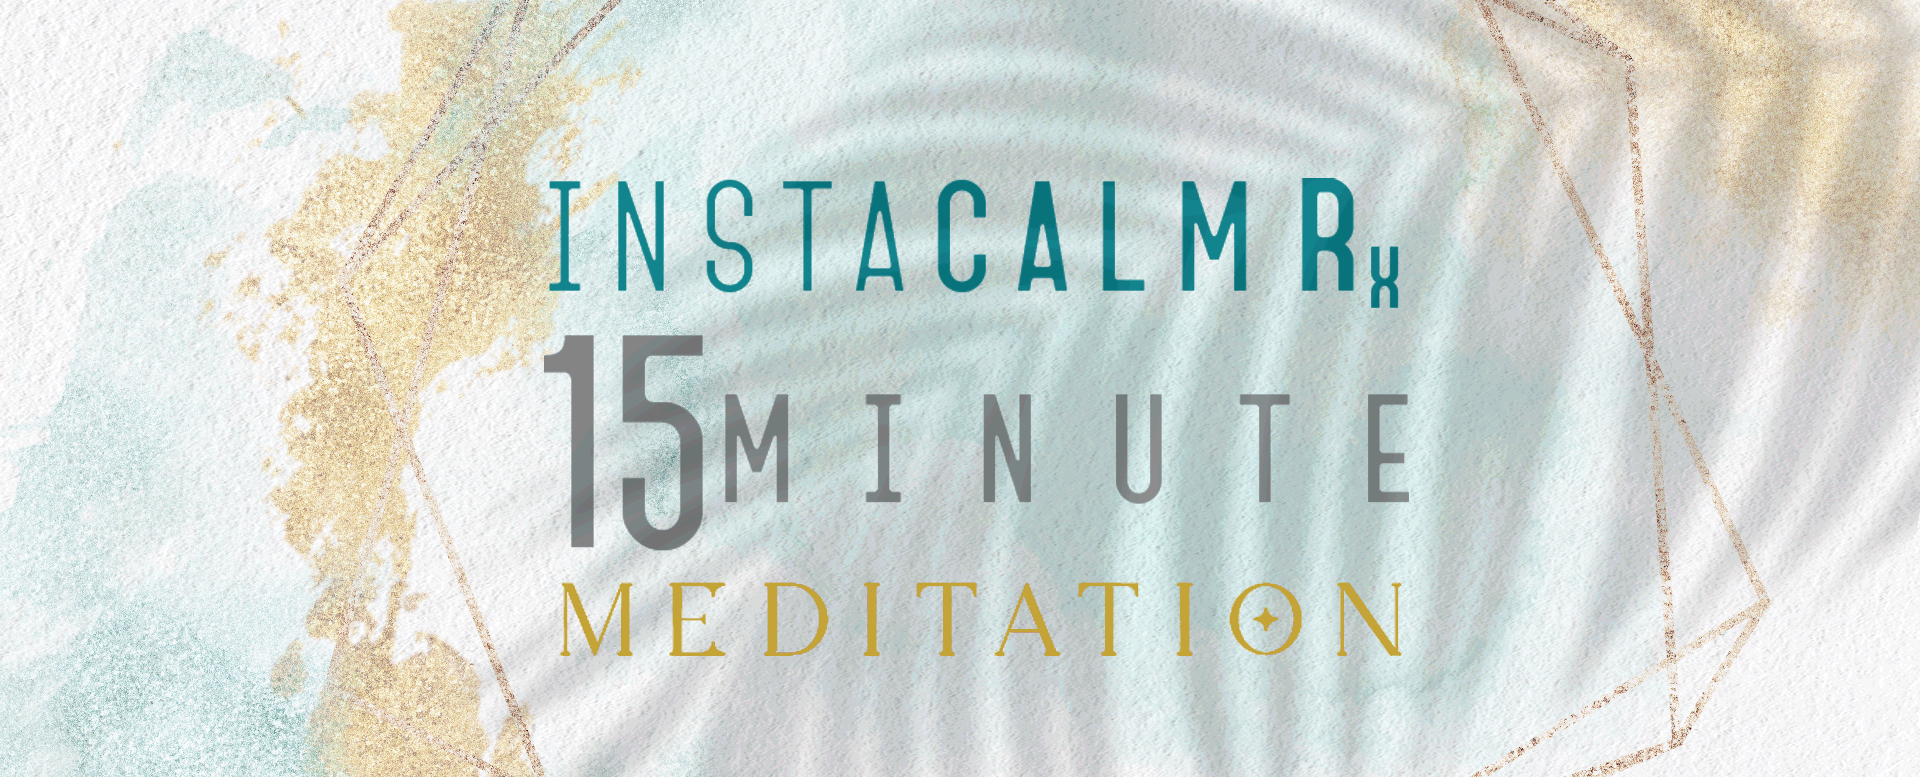 practical wisdom: instacalm Rx - instantly download a 15 minute meditation for self-soothing - the wisdom podcast with dorothy ratusny | truth serum, a-ha moments and practical wisdom for life, love + self-realization